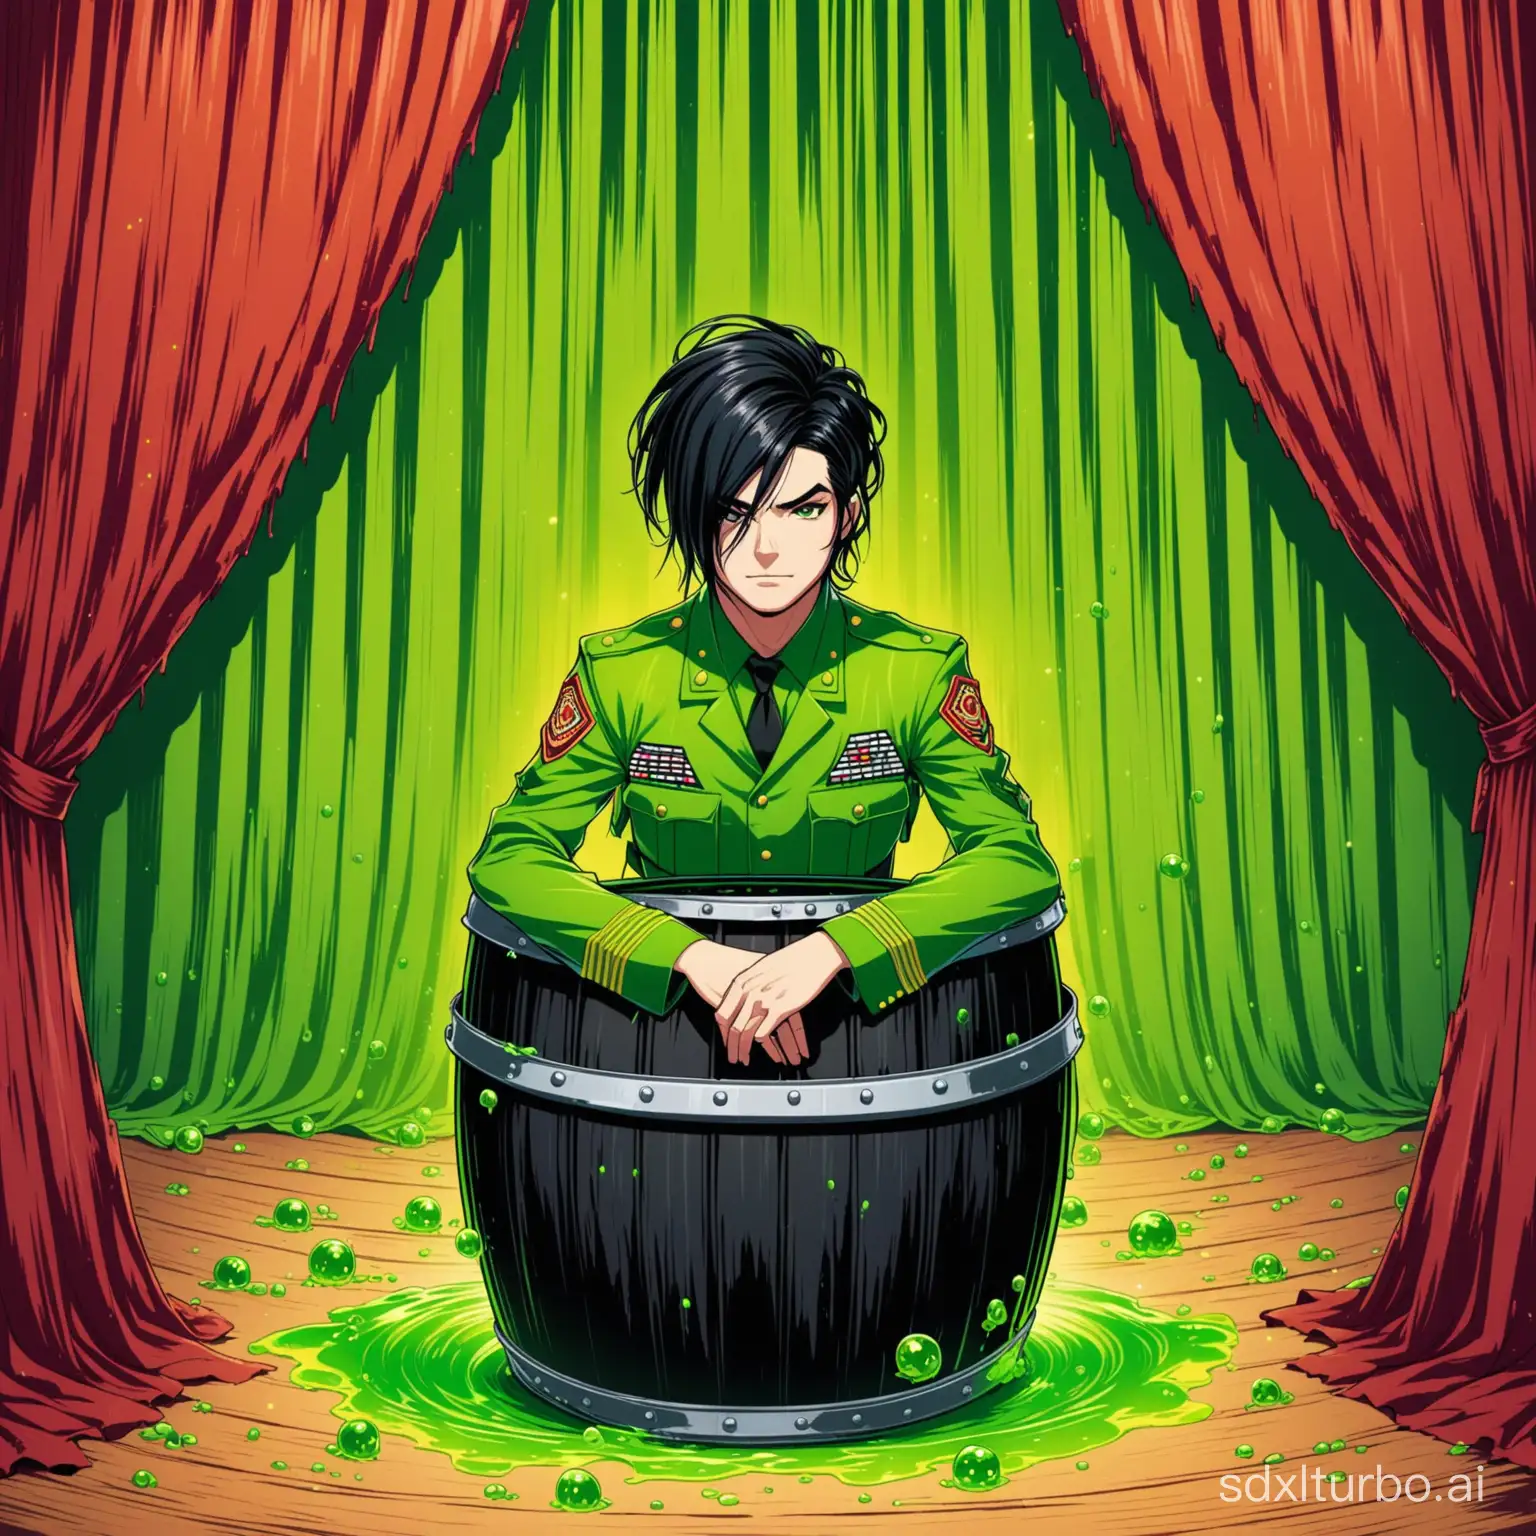 music album cover, guy, curtains hairstyle, black hair, sitting in toxic barrel, sergeant toxic